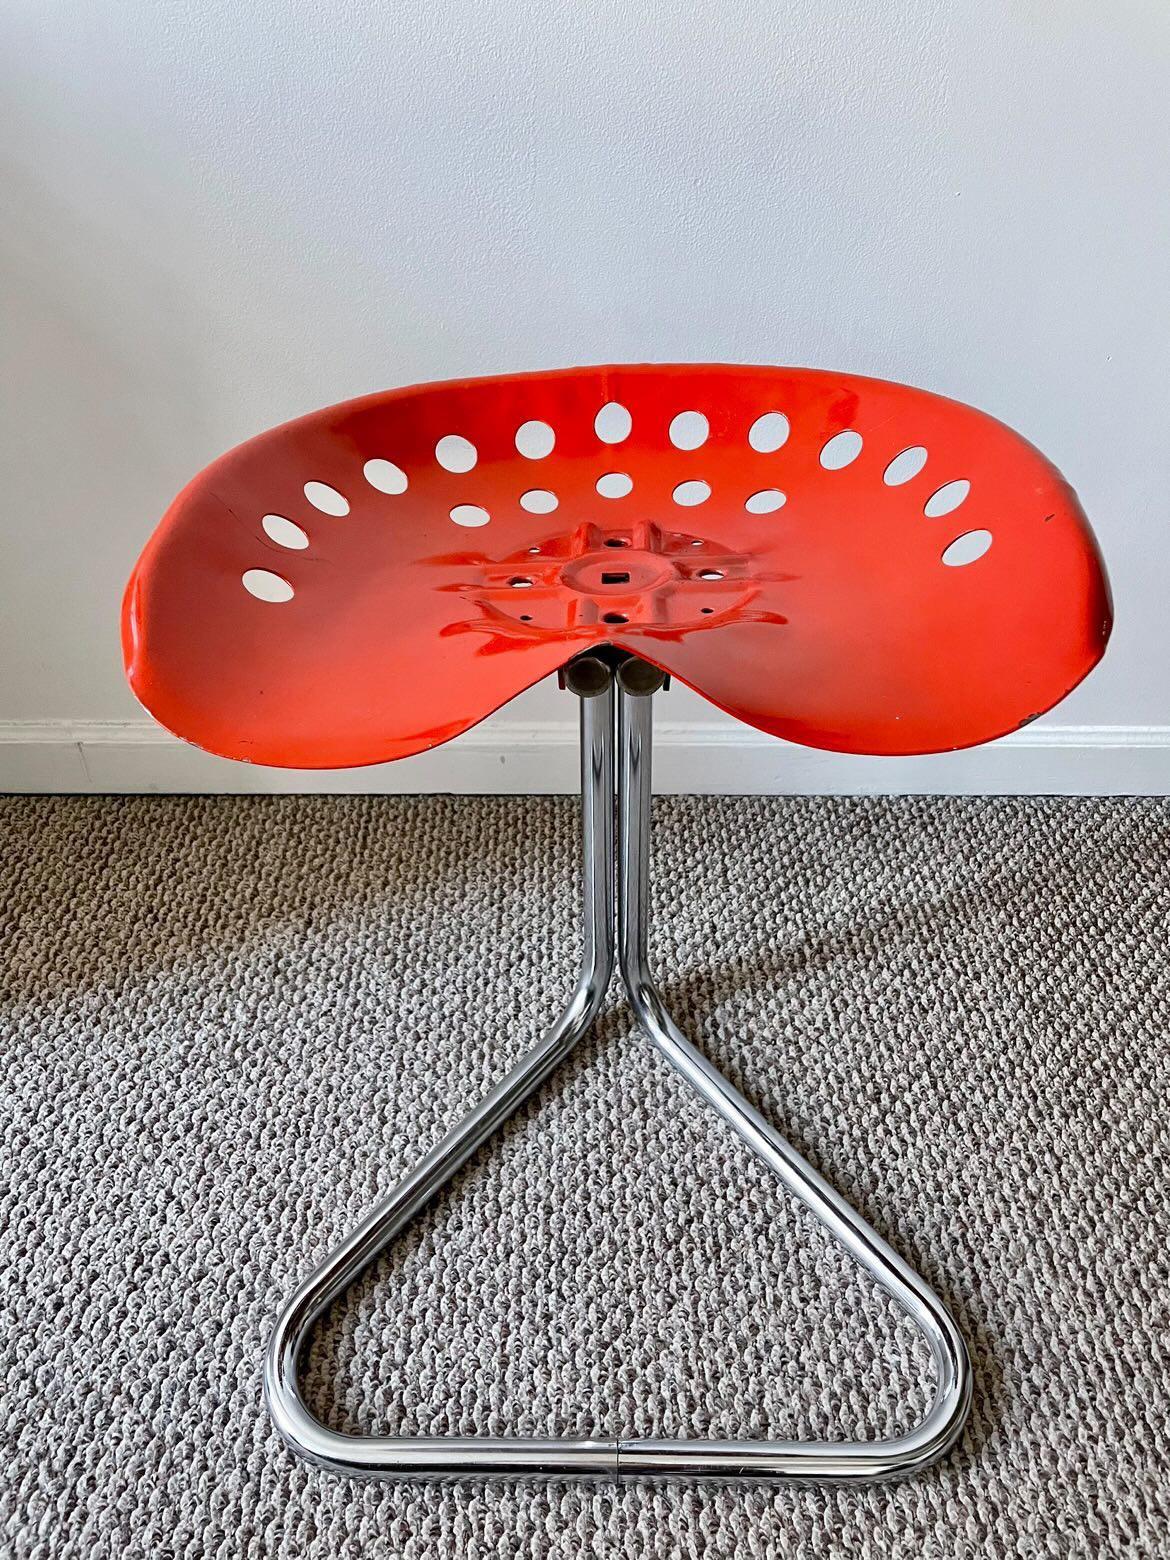 Original T7 stool by Rodney Kinsman for his company OMK, England 1971. Beautiful and rare red color in good condition.